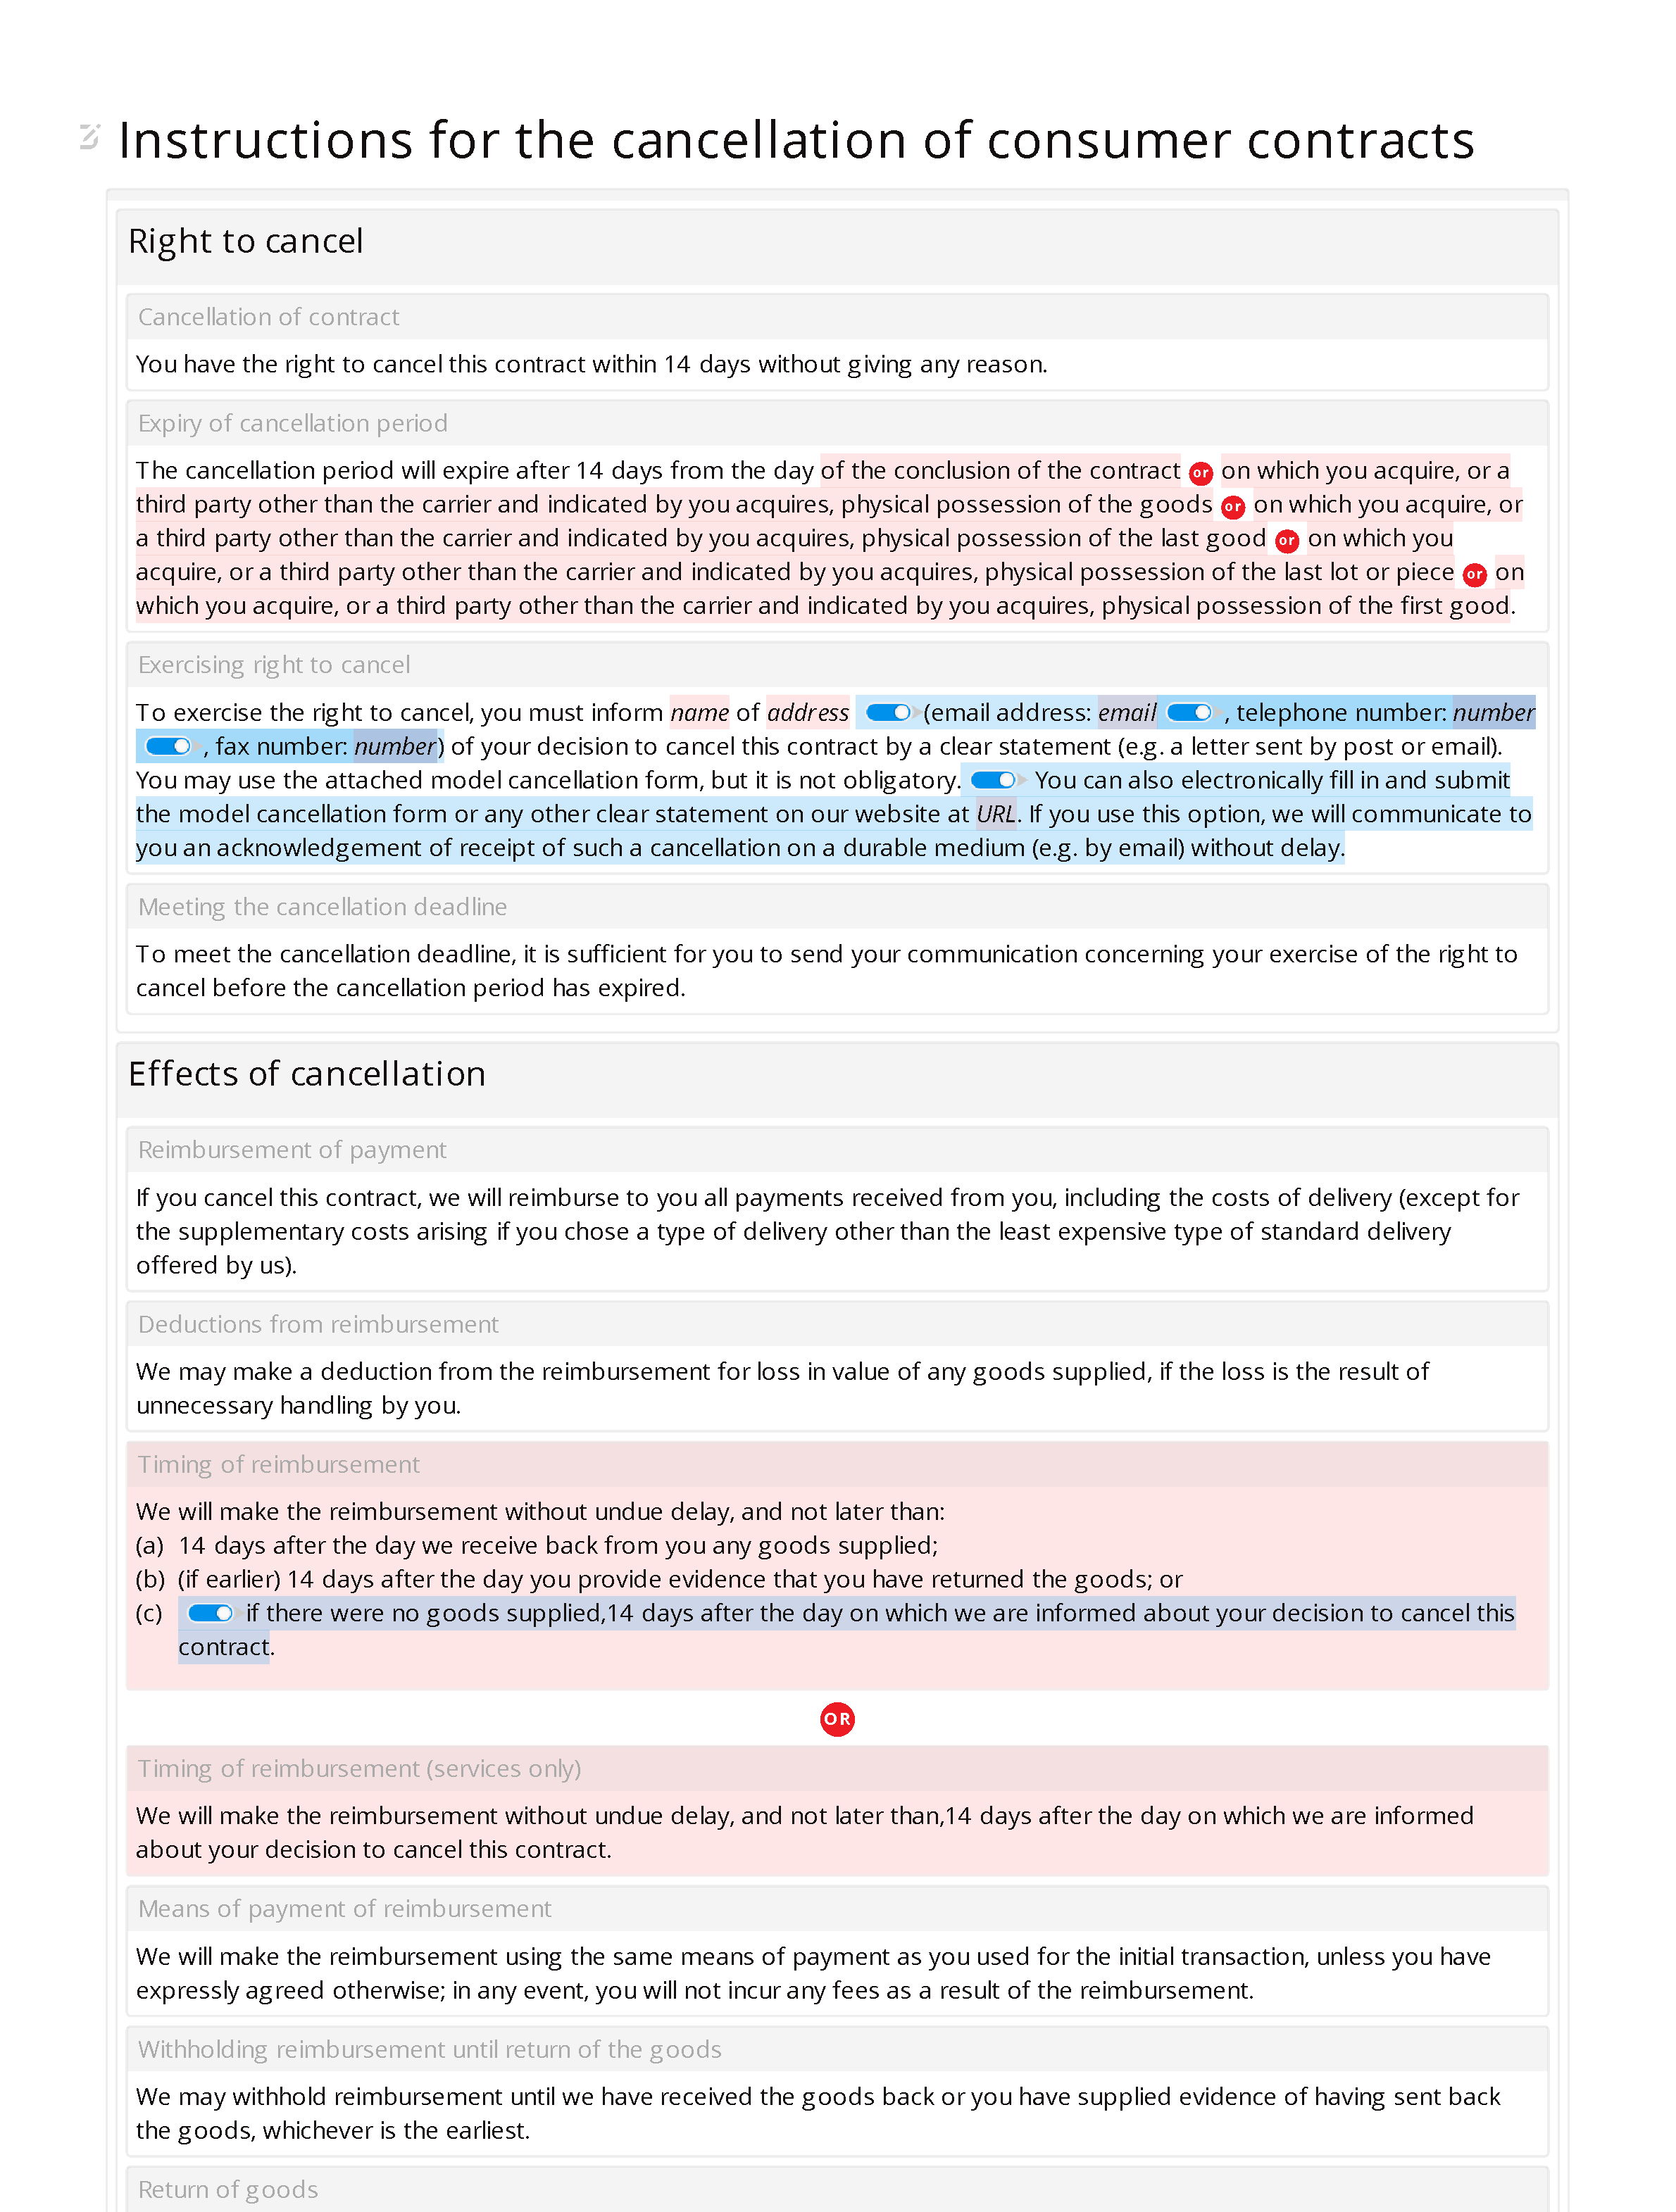 Consumer contracts model instructions for cancellation document editor preview